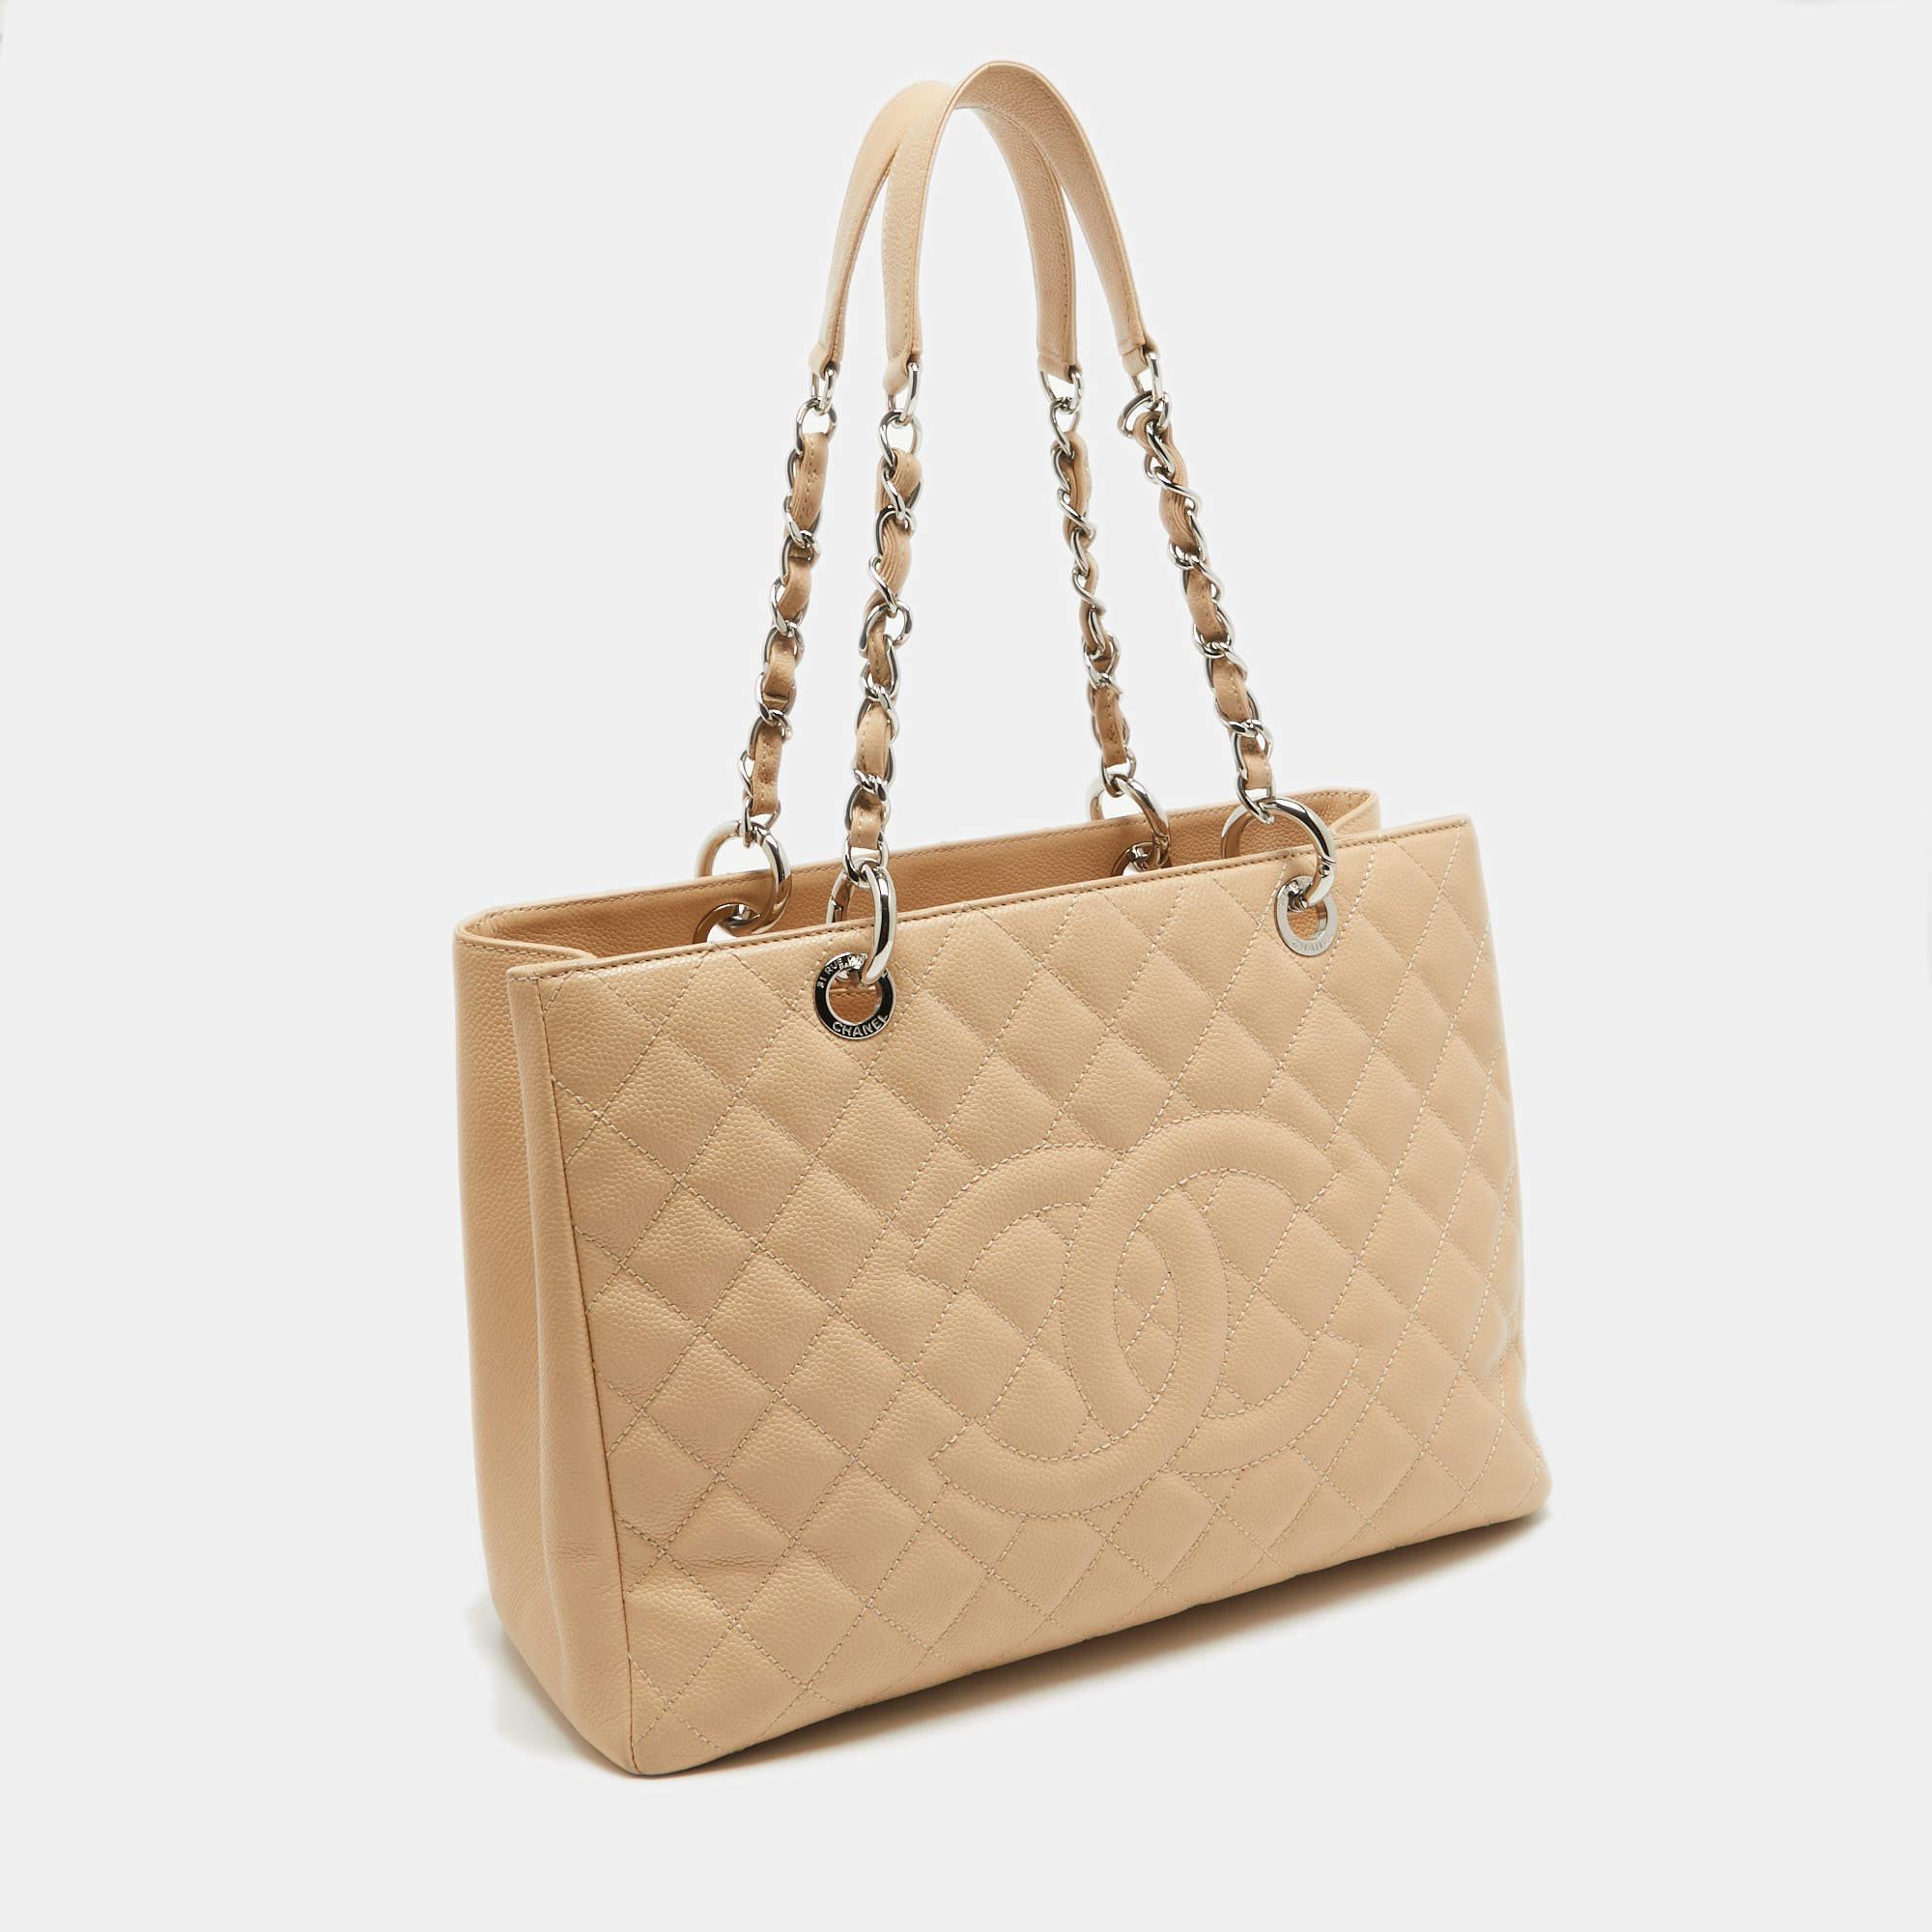 Chanel Beige Quilted Caviar Leather GST Shopper Tote For Sale 11